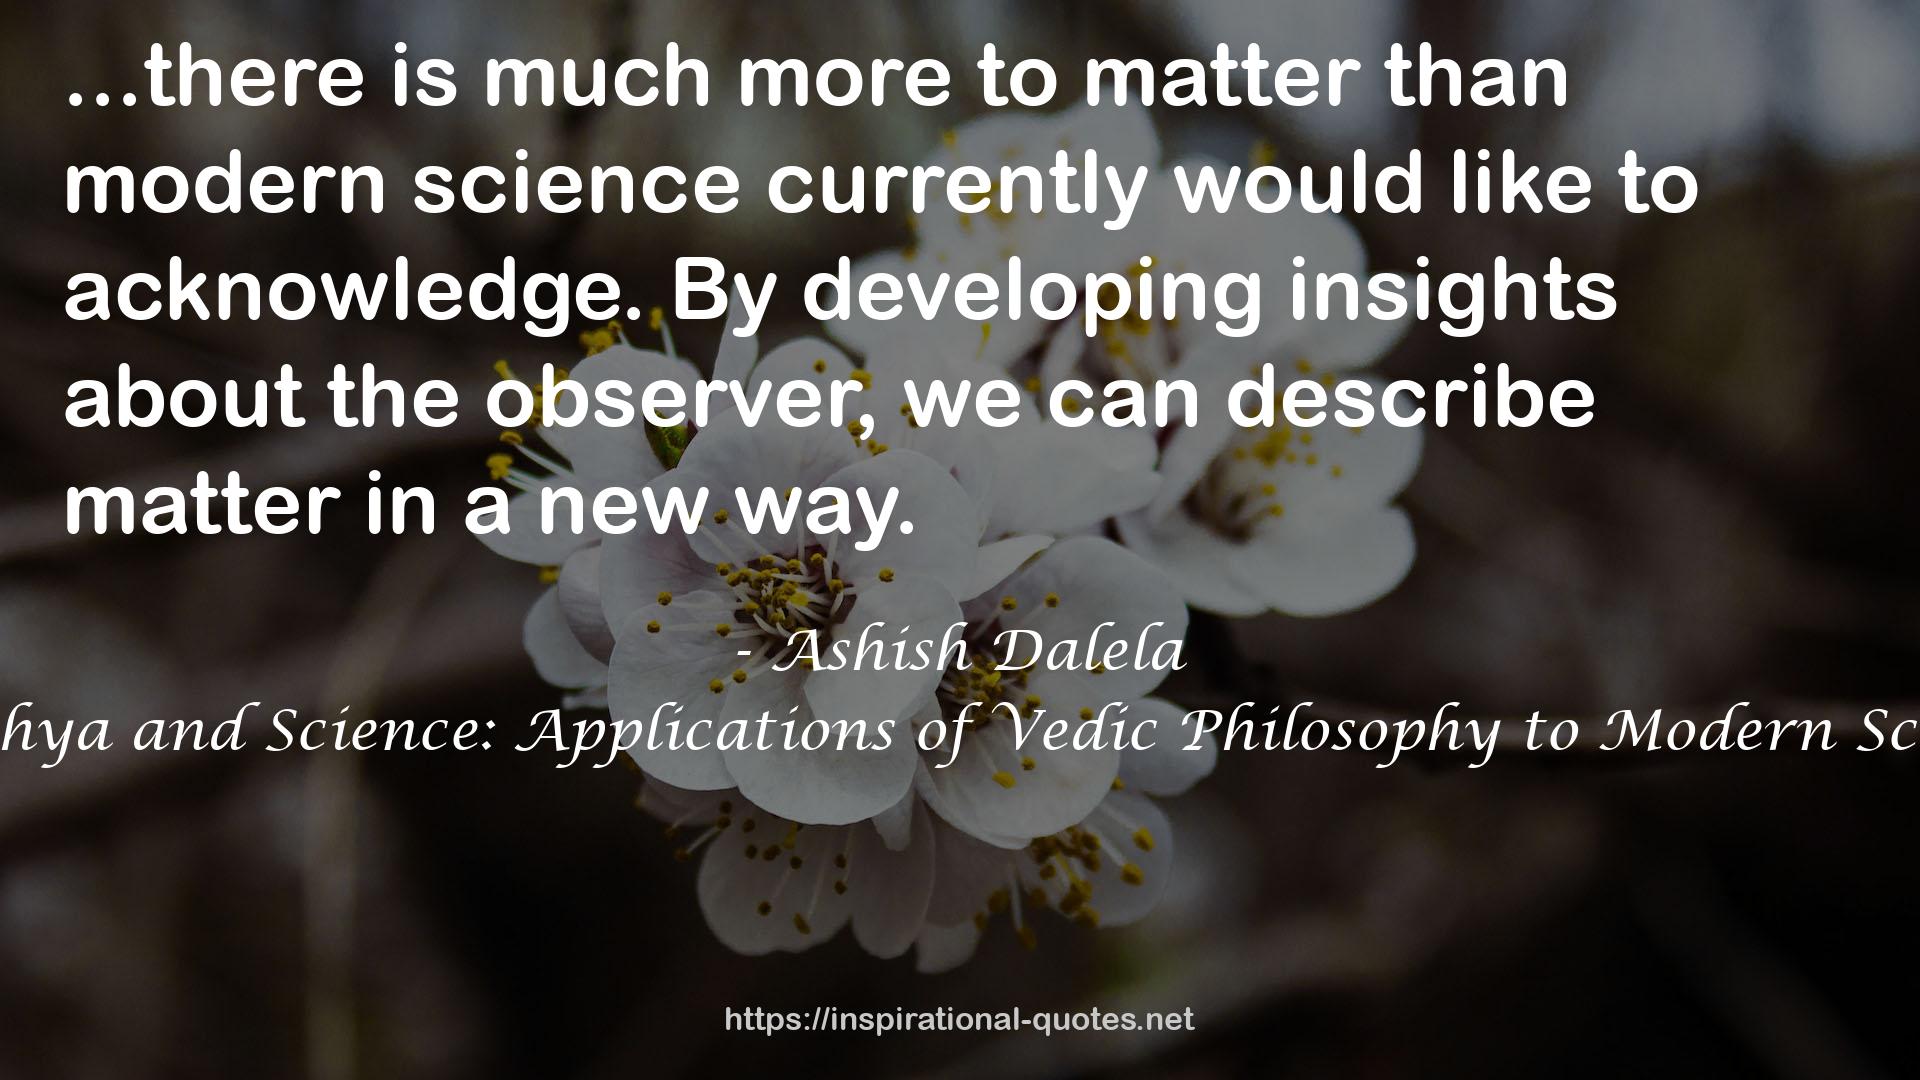 Sankhya and Science: Applications of Vedic Philosophy to Modern Science QUOTES